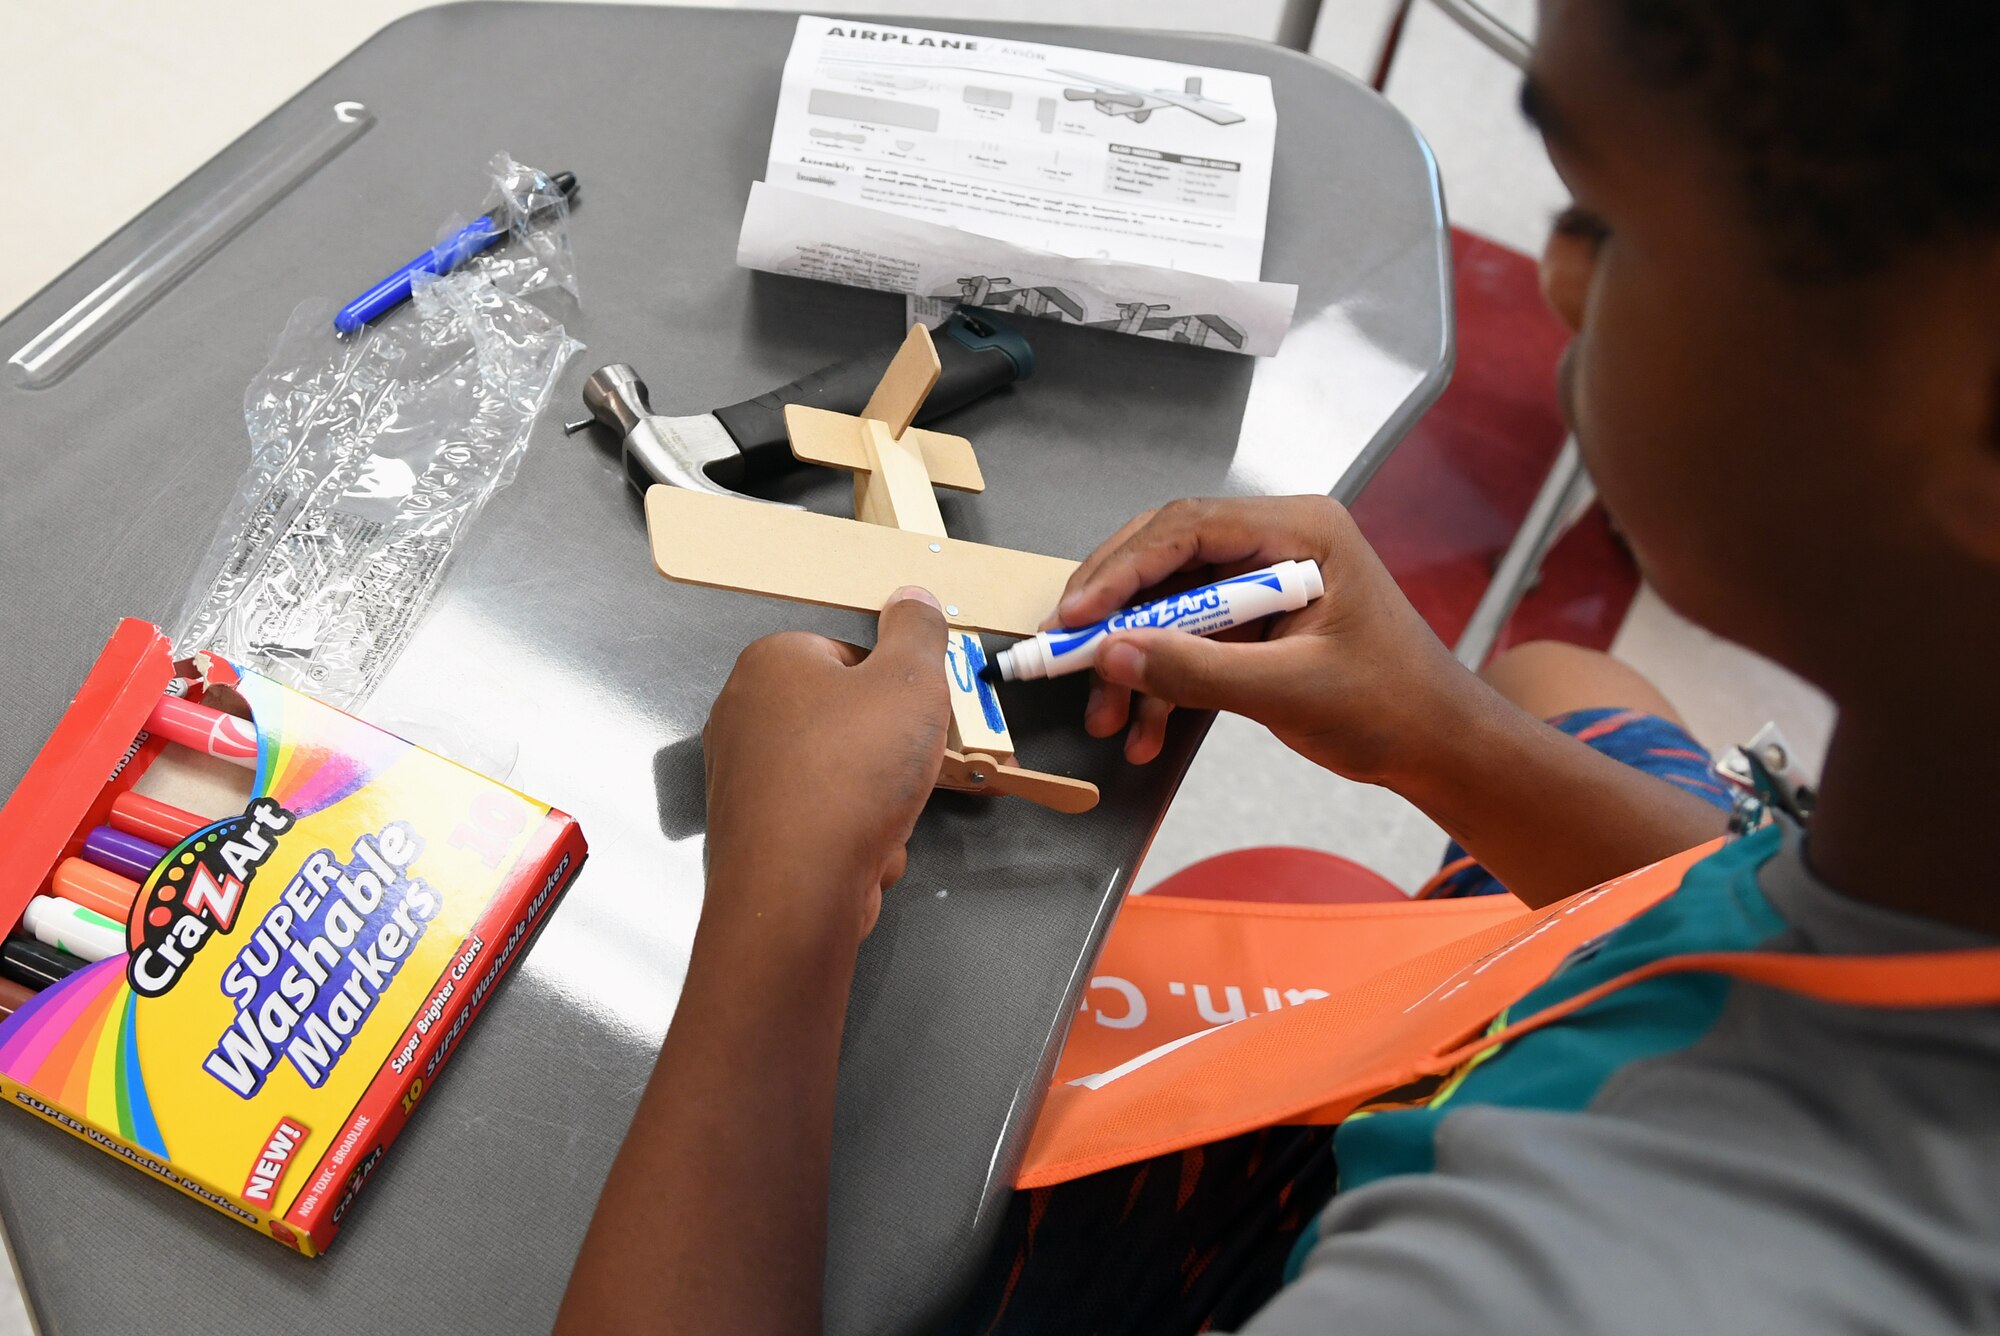 Kaleb Foggie, Biloxi Junior High School eighth-grader, colors a wooden airplane after assembly during the Biloxi Public Schools Science, Technology, Engineering and Mathematics Summer Camp program at Biloxi High School in Biloxi, Mississippi, June 25, 2019. The four-day STEM summer program teaches first through seventh grade students skills for future careers and fosters valuable life skills like problem solving, creativity and collaboration. Keesler personnel volunteered their time to lead instructions on various projects. (U.S. Air Force photo by Kemberly Groue)